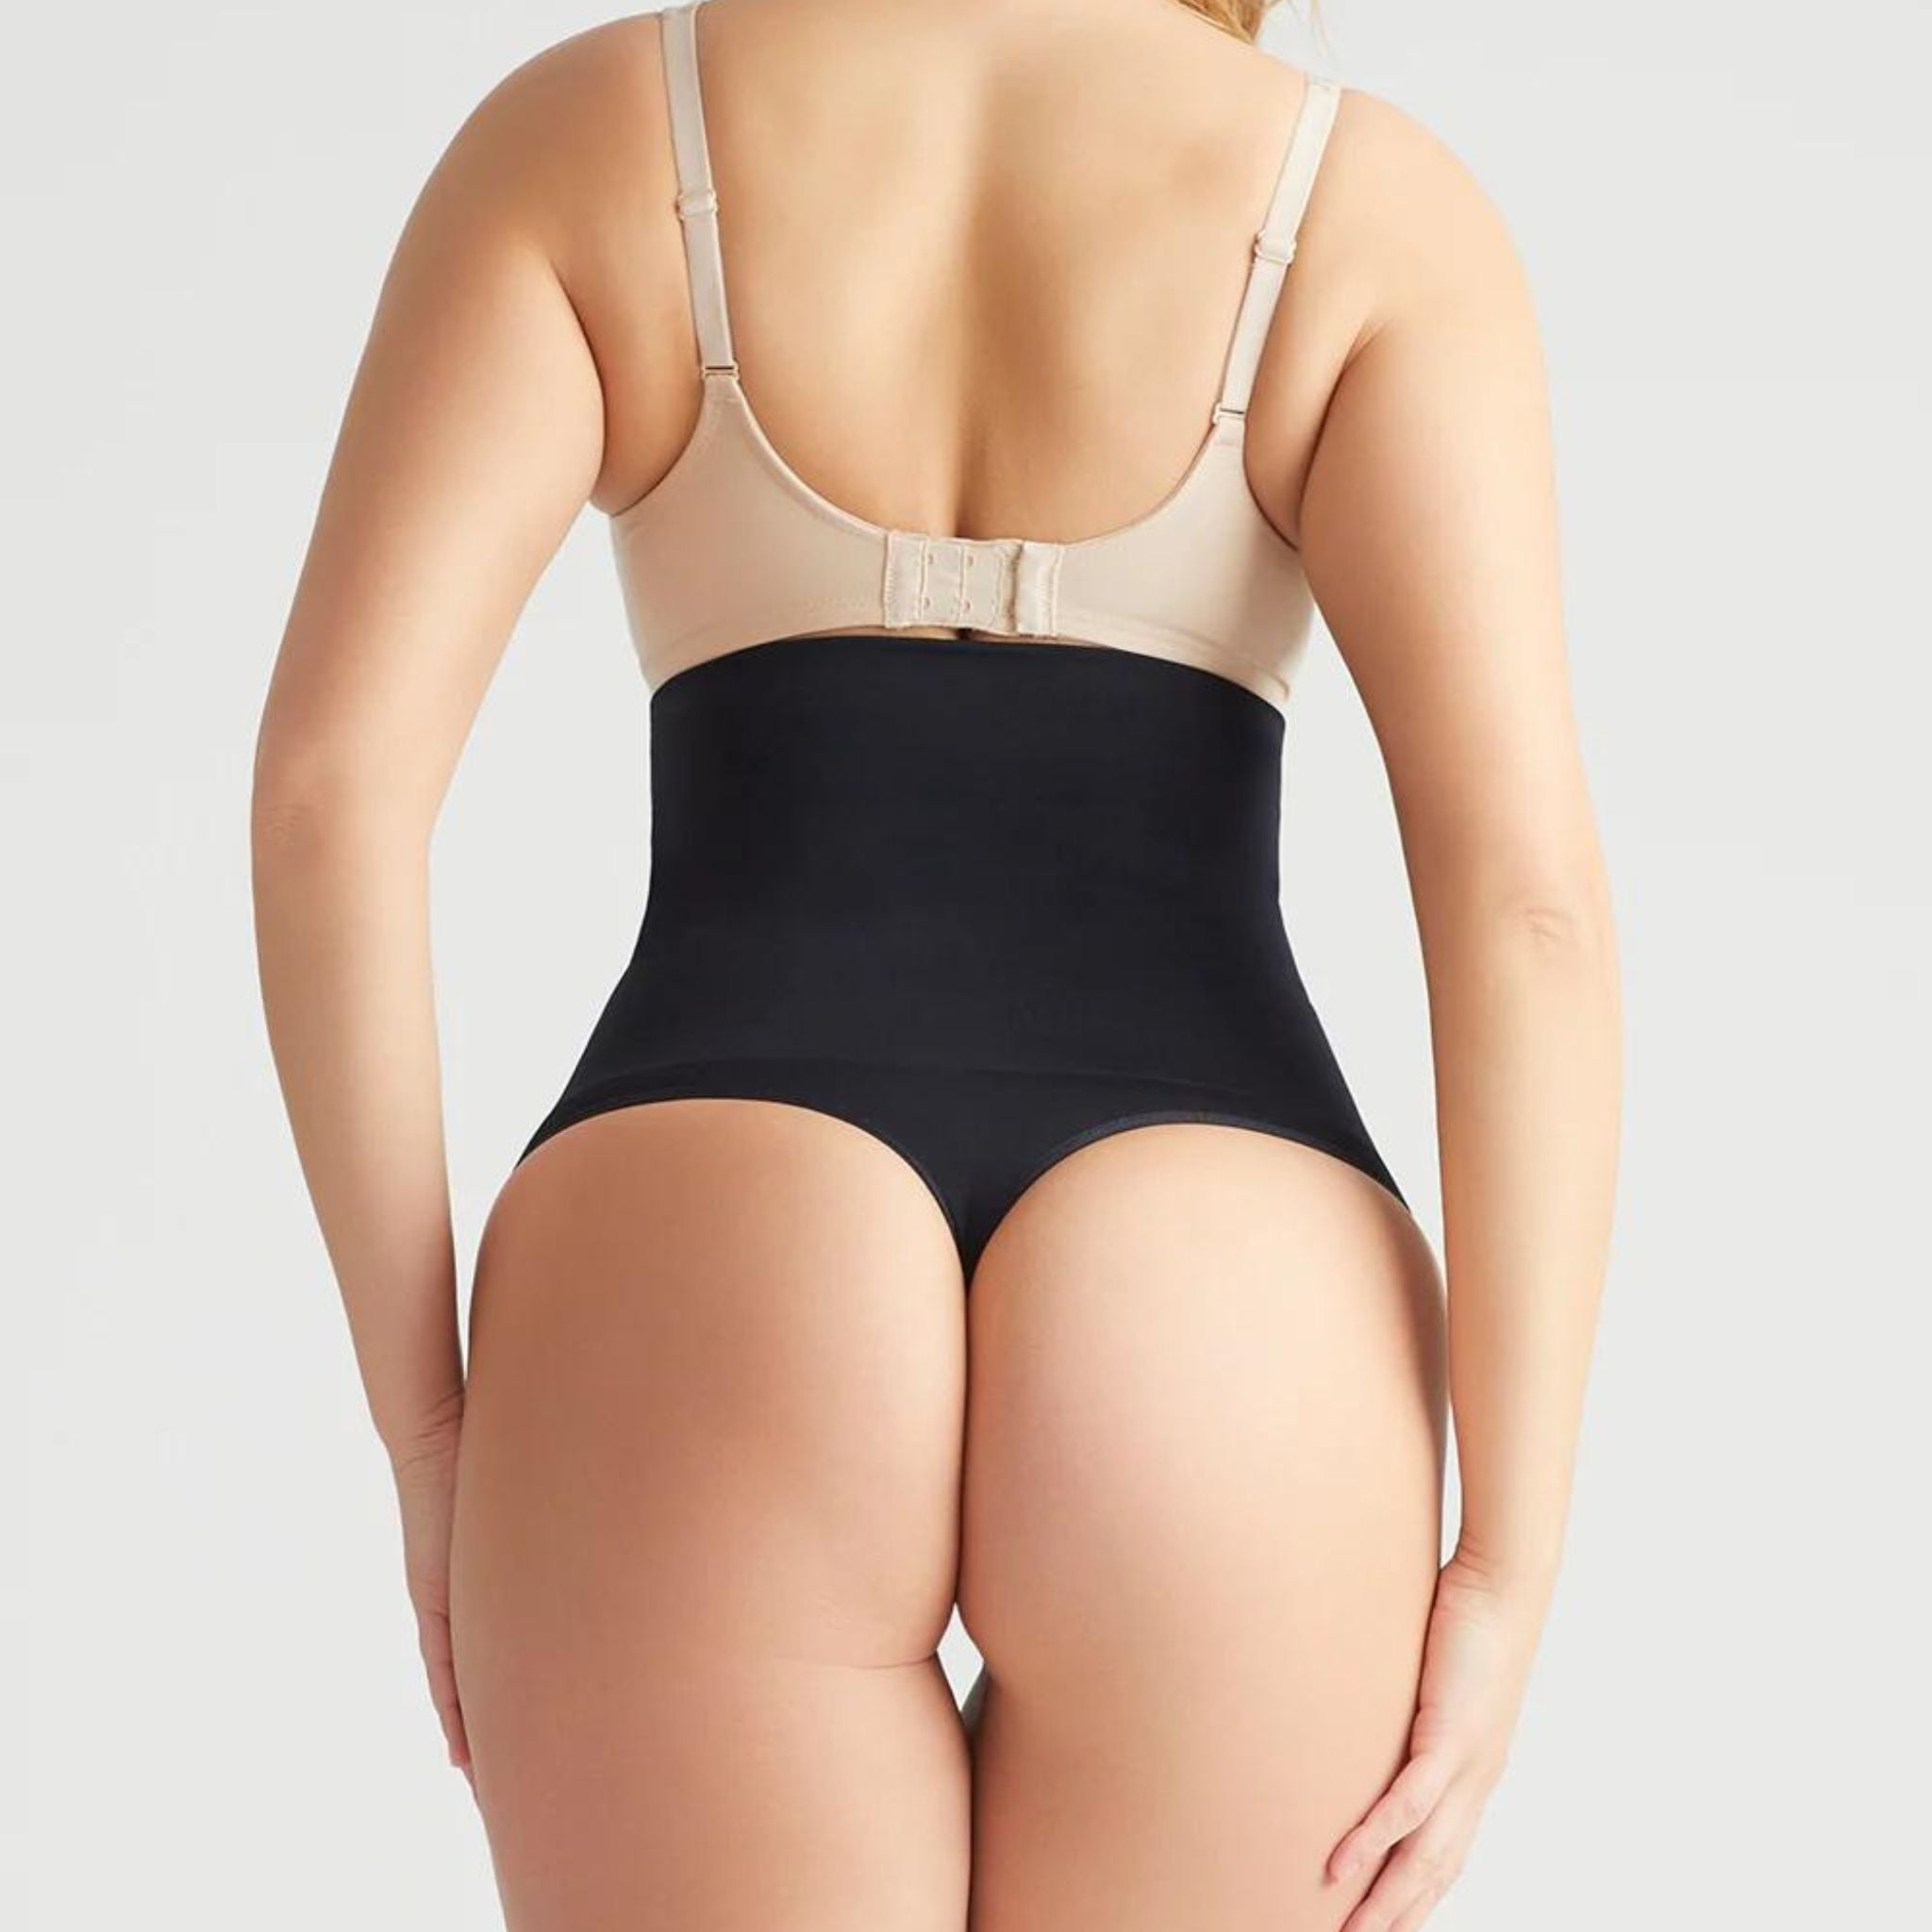 This high waist thong offers firm support and smooths your tummy with the Yummie Hug.  Level 4 firm shaping  Targeted waist shaping  Seamless styling gives you complete allover smoothing  Smooths and shapes comfortably everyday  Soft silicone at waist provides no-slip confidence  High-waist design sits just below the bra line  Thong back for no VPL